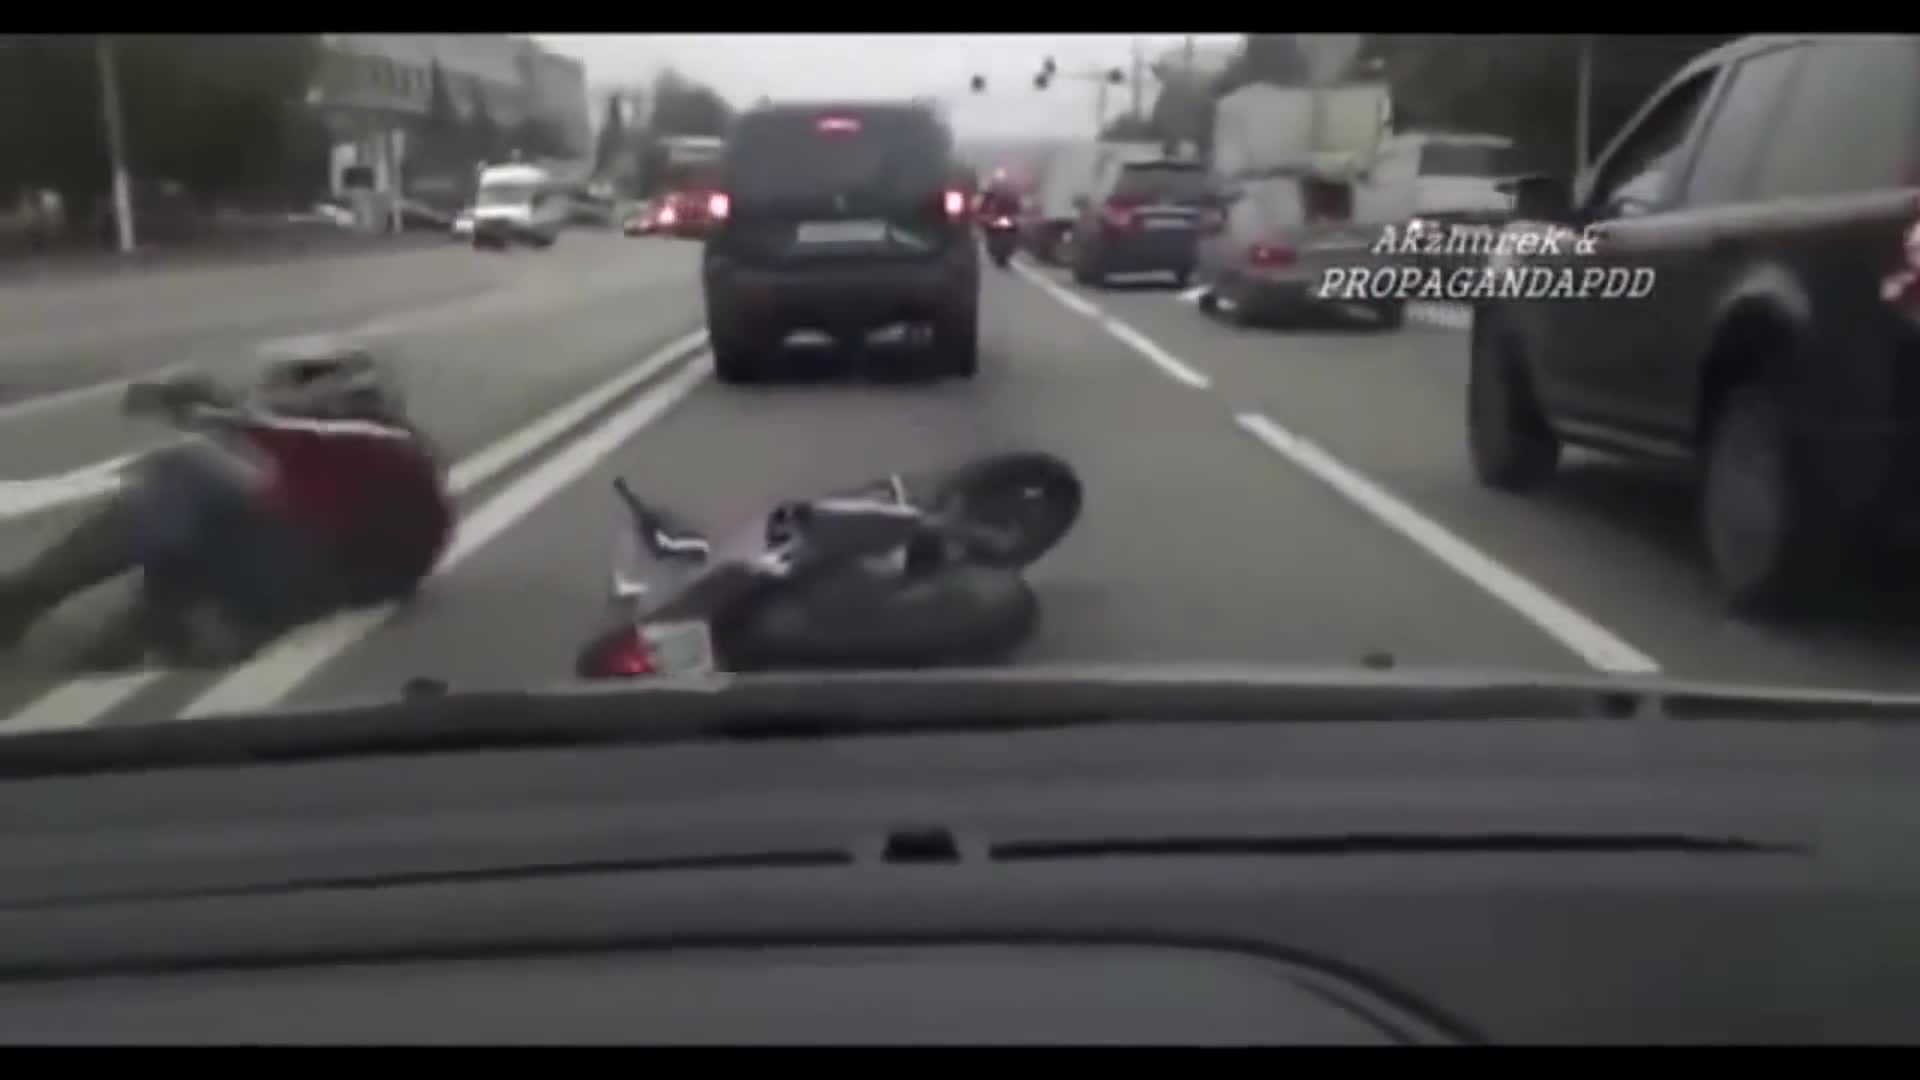 new top 10 real motorcycle top crashes - Motorbike crashes too epic -  top crashes of motorcycles